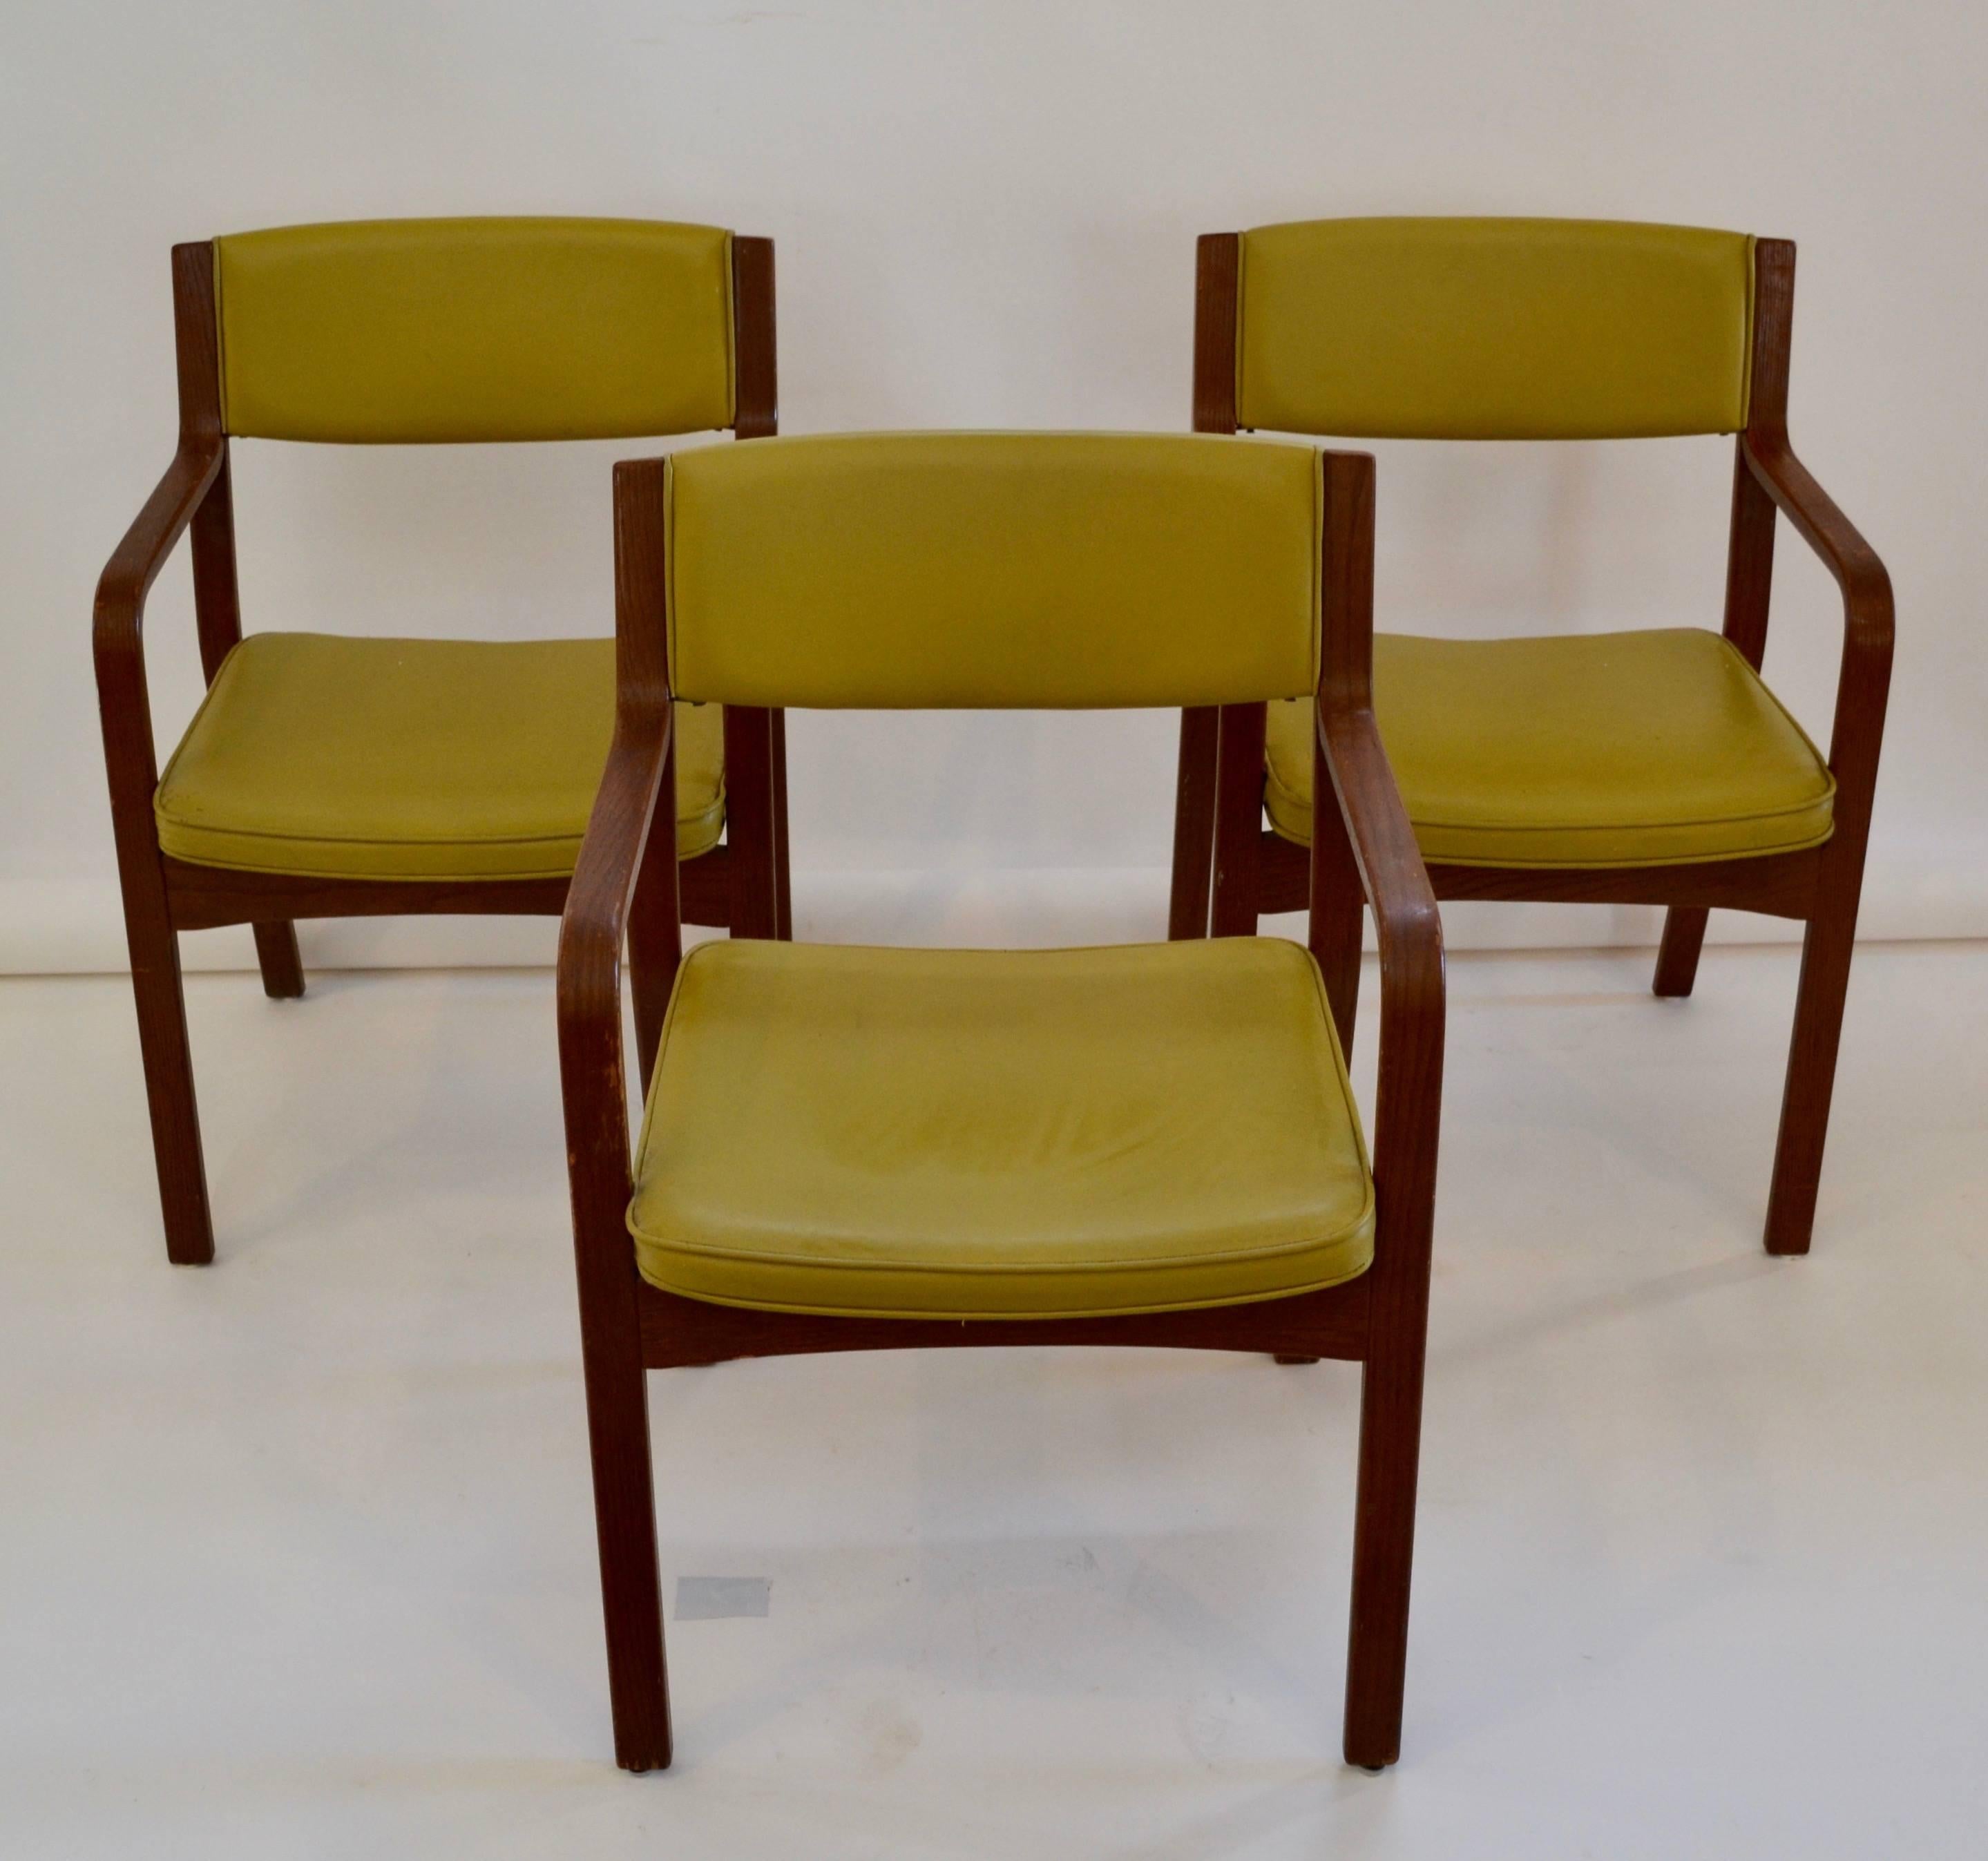 Set of four vinyl and bentwood Thonet armchairs with original finish and green upholstery. These chairs are characteristically sturdy, comfortable and well proportioned. They are in remarkably clean condition.